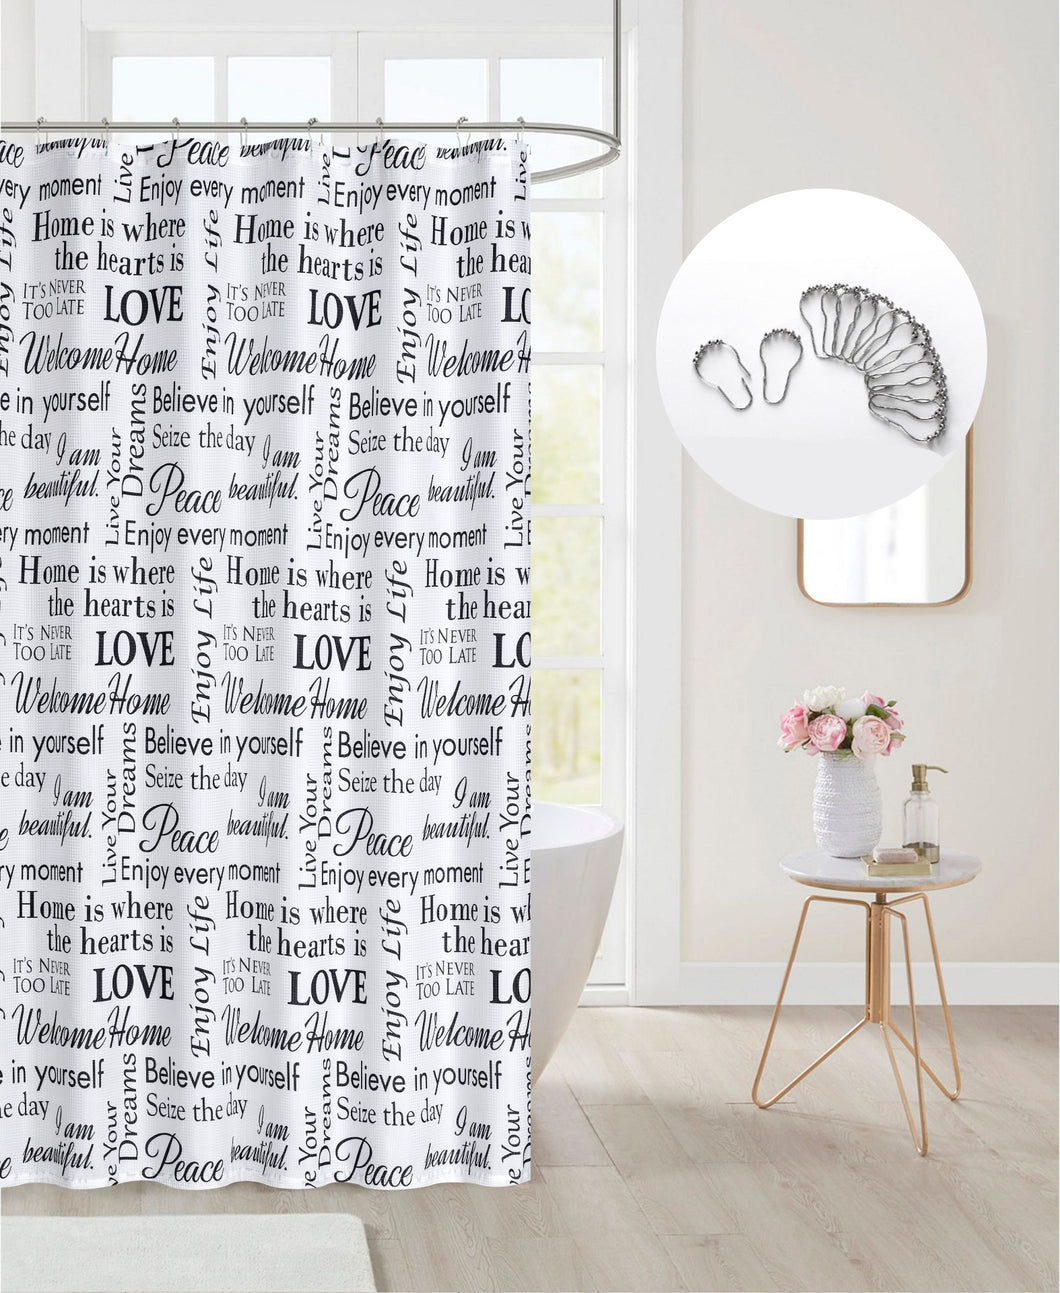 Dainty Home Printed 3D Textured Waffle Weave Textured Love Phrases Designed Fabric Shower Curtain with 12 Roller Ball Hooks Included 70